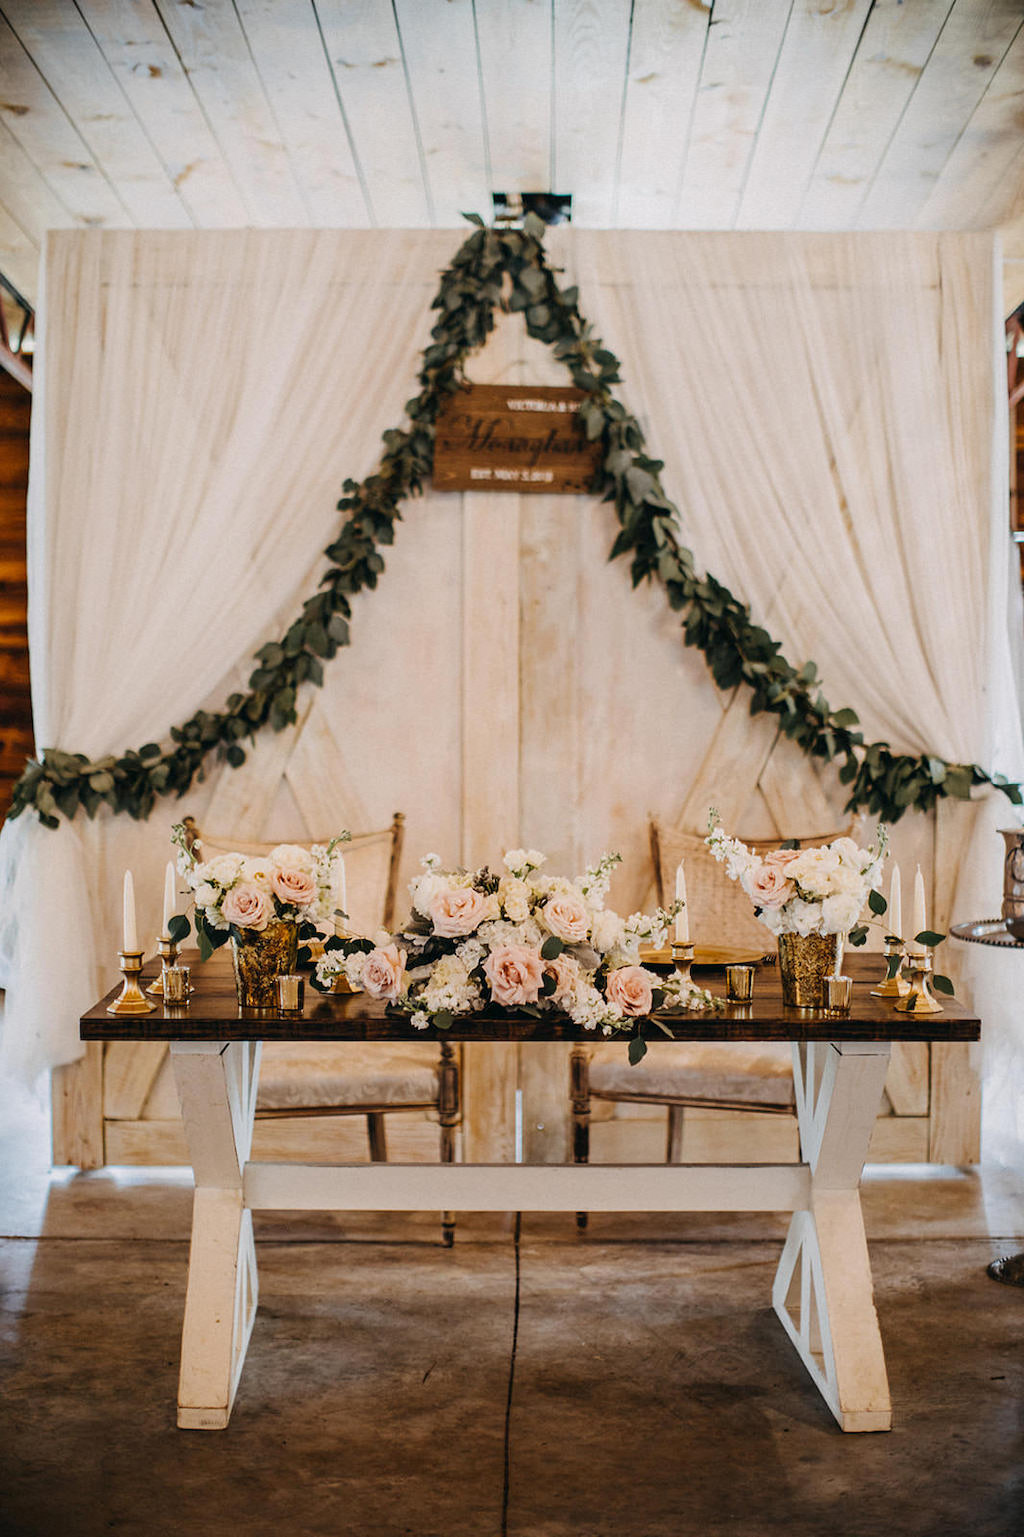 Florida Rustic Barn Wedding Reception Decor, Wooden Sweetheart Table with Blush Pink, Ivory Roses Centerpiece, White Draping with Greenery Garland